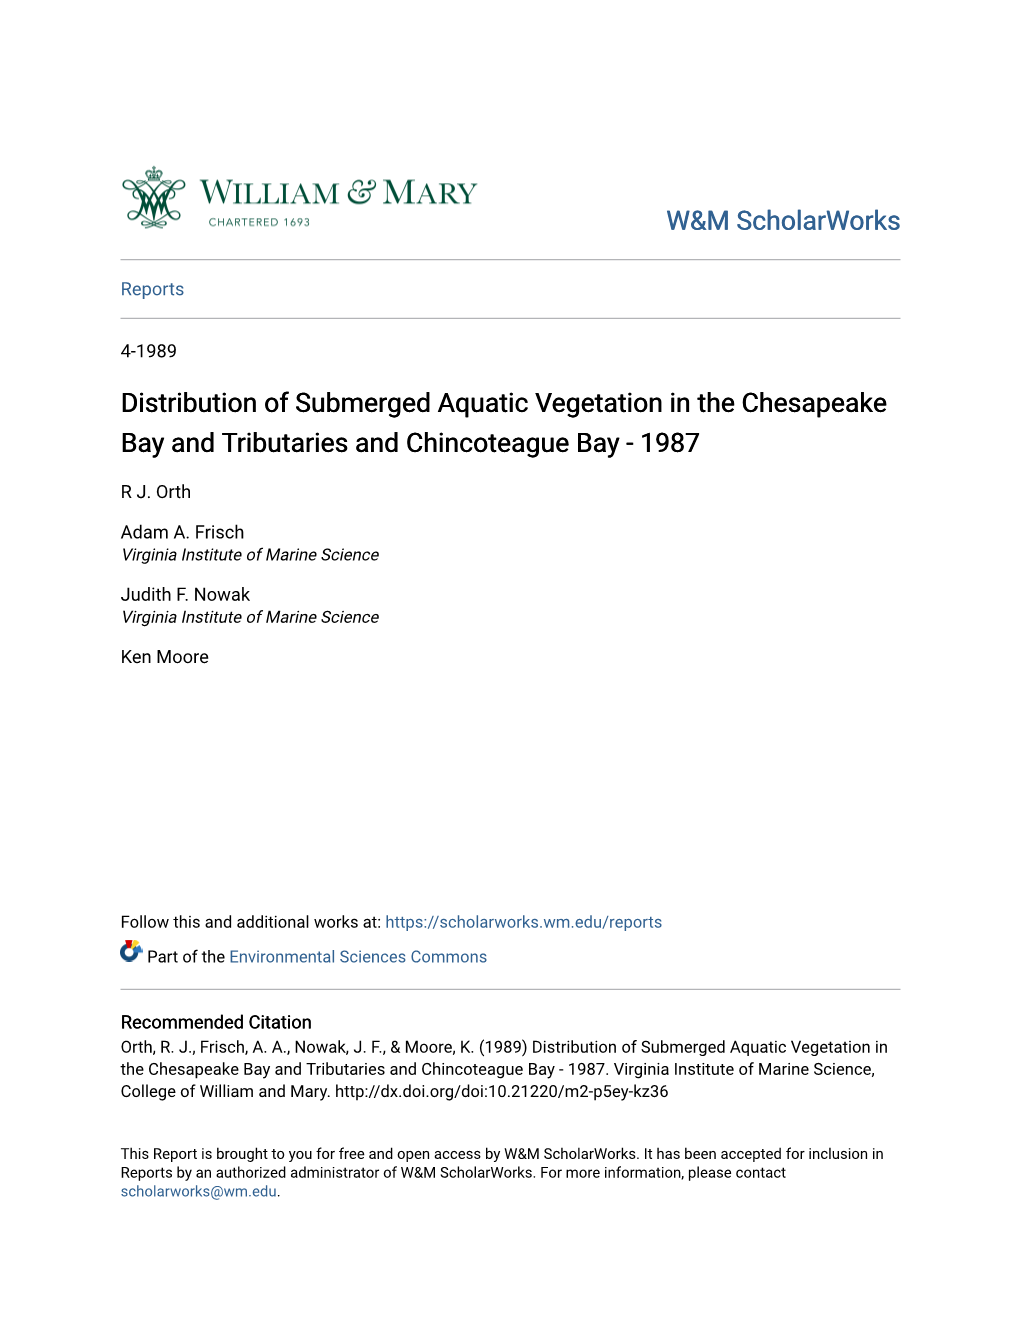 Distribution of Submerged Aquatic Vegetation in the Chesapeake Bay and Tributaries and Chincoteague Bay - 1987